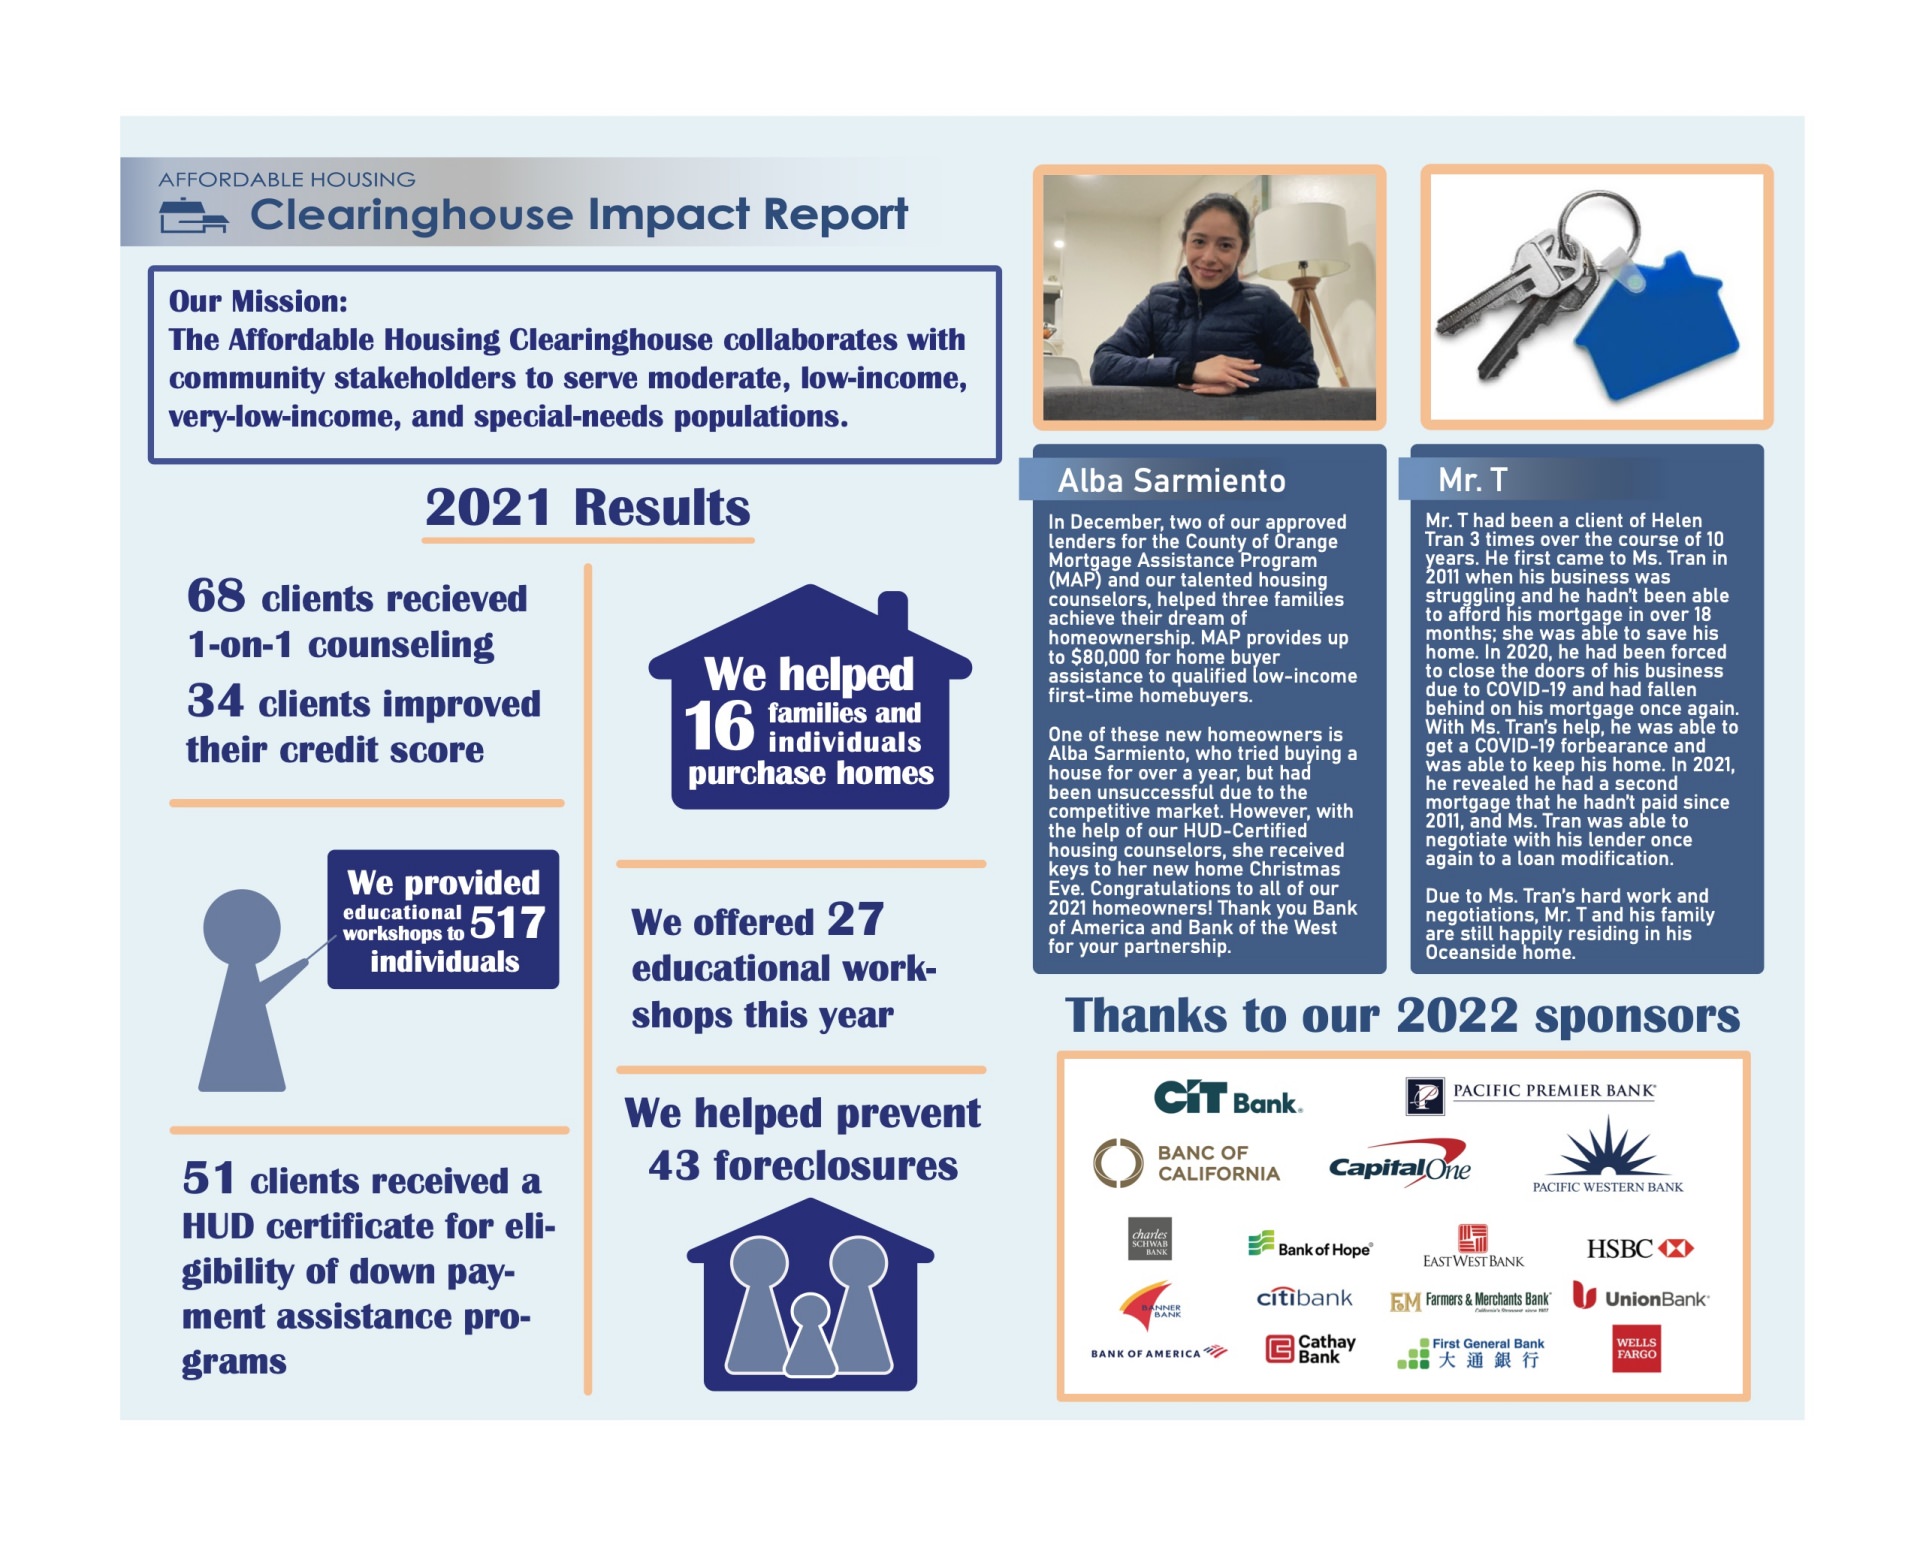 2021 Impact Report from Affordable Housing Clearinghouse